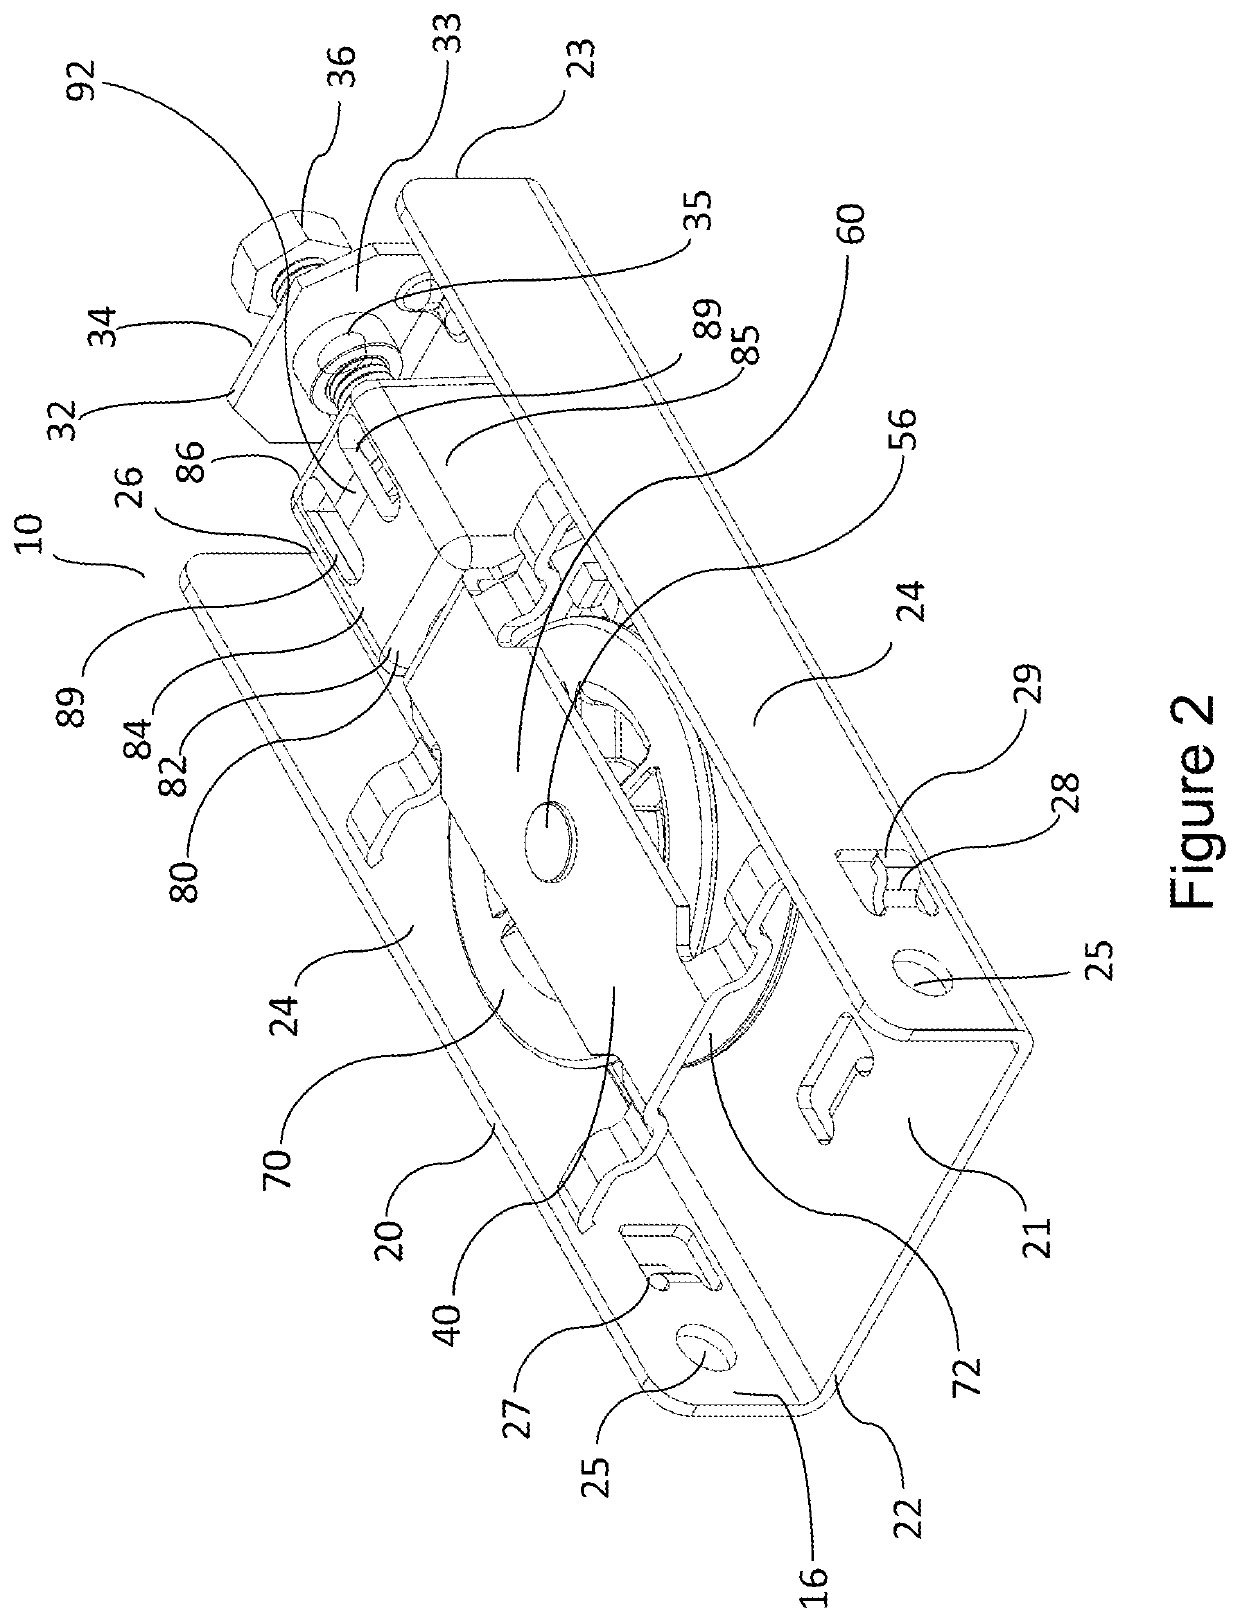 Tensioning device for a drive train